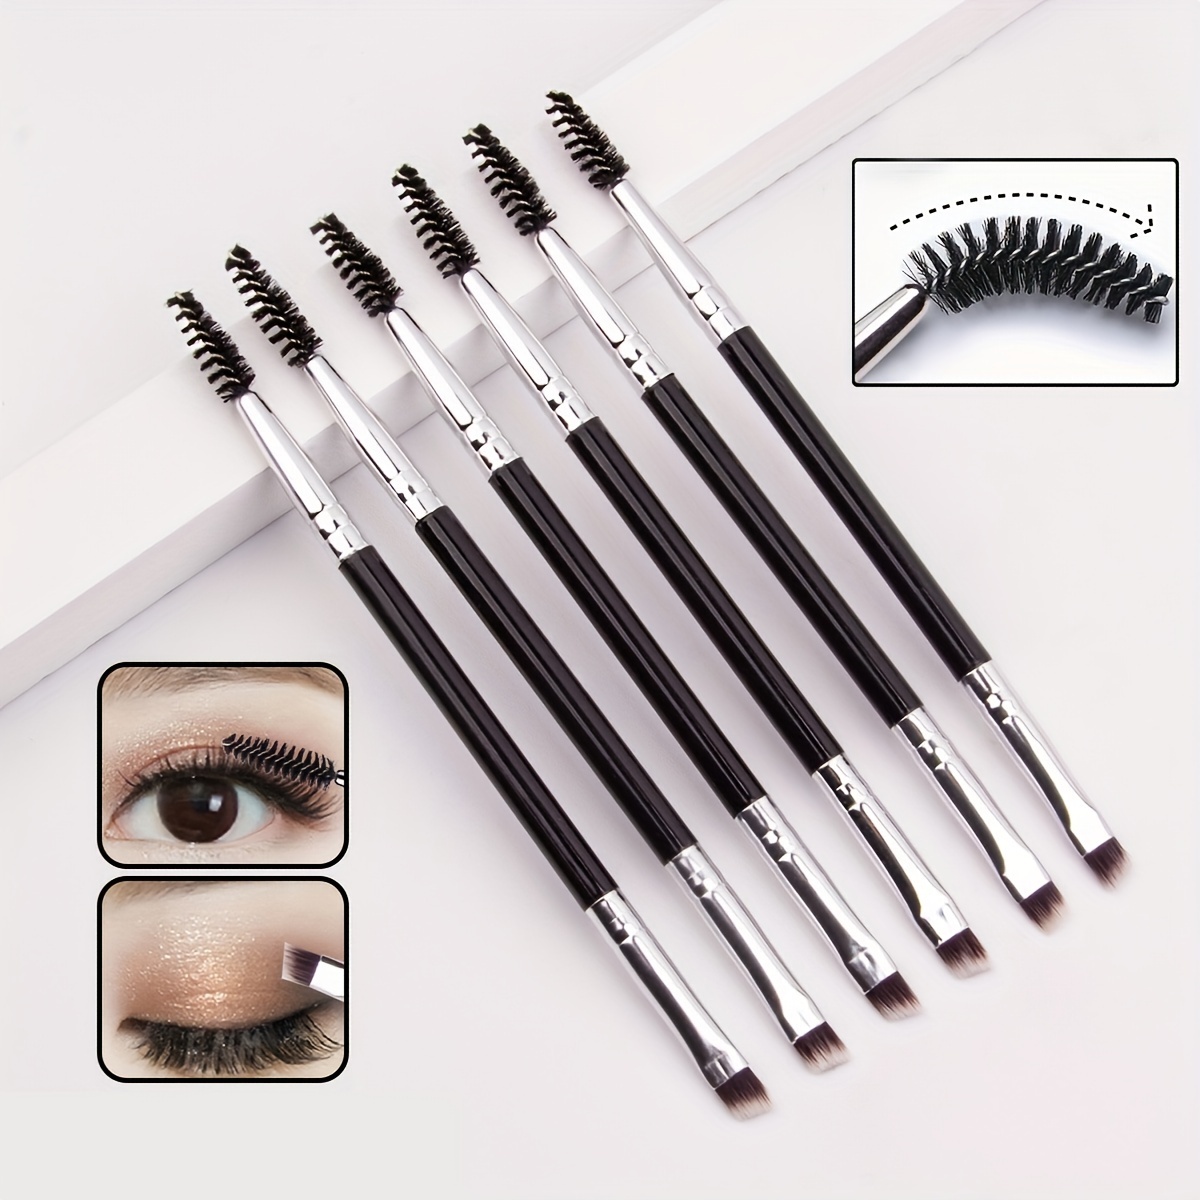 8 pieces Barber Pencil Set 6 Microblading Marker Pen with removal